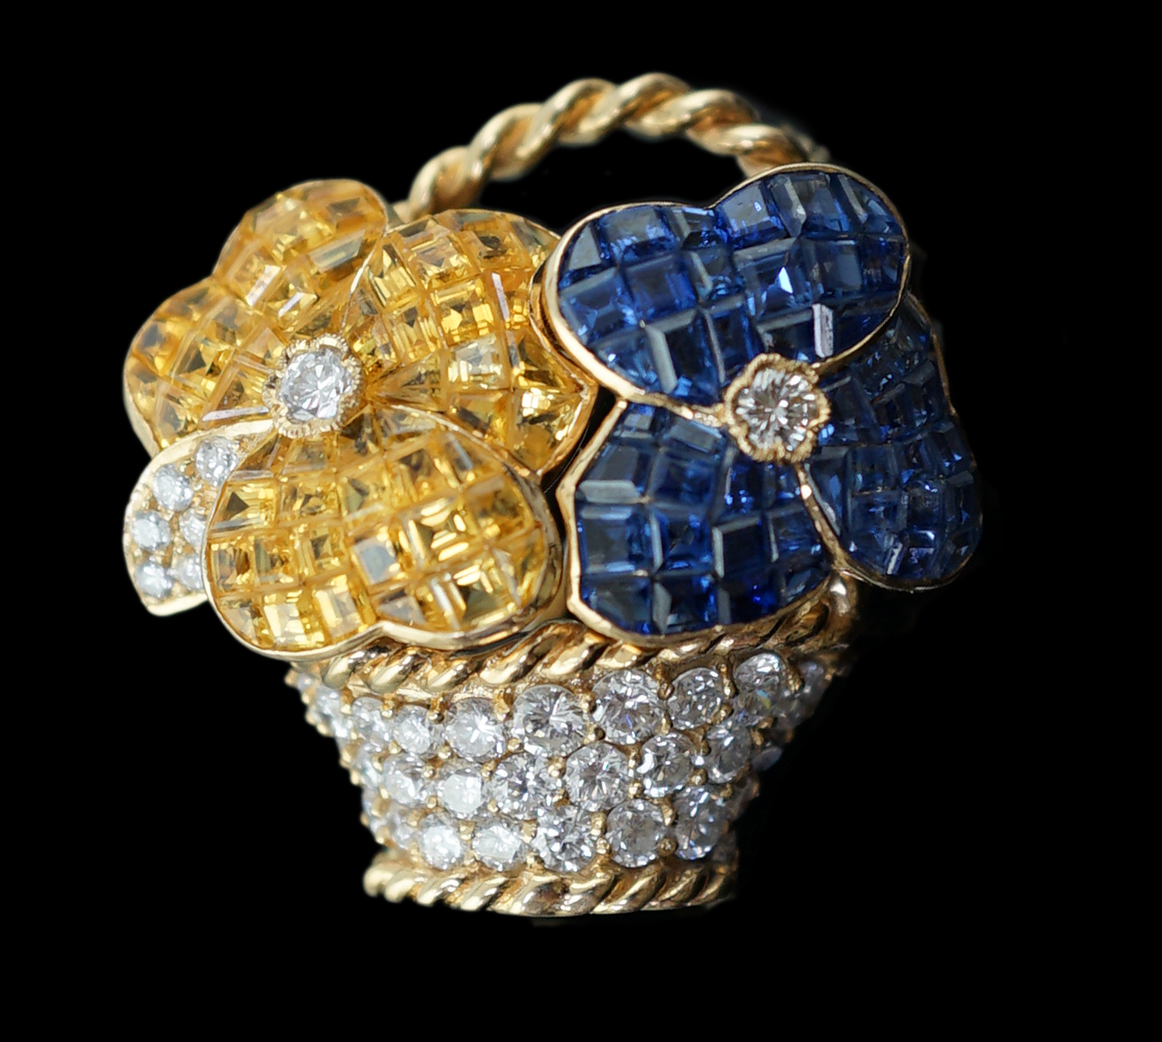 A Tiffany & Co 18k gold, two colour sapphire and diamond cluster set brooch, modelled as a basket with two flower heads